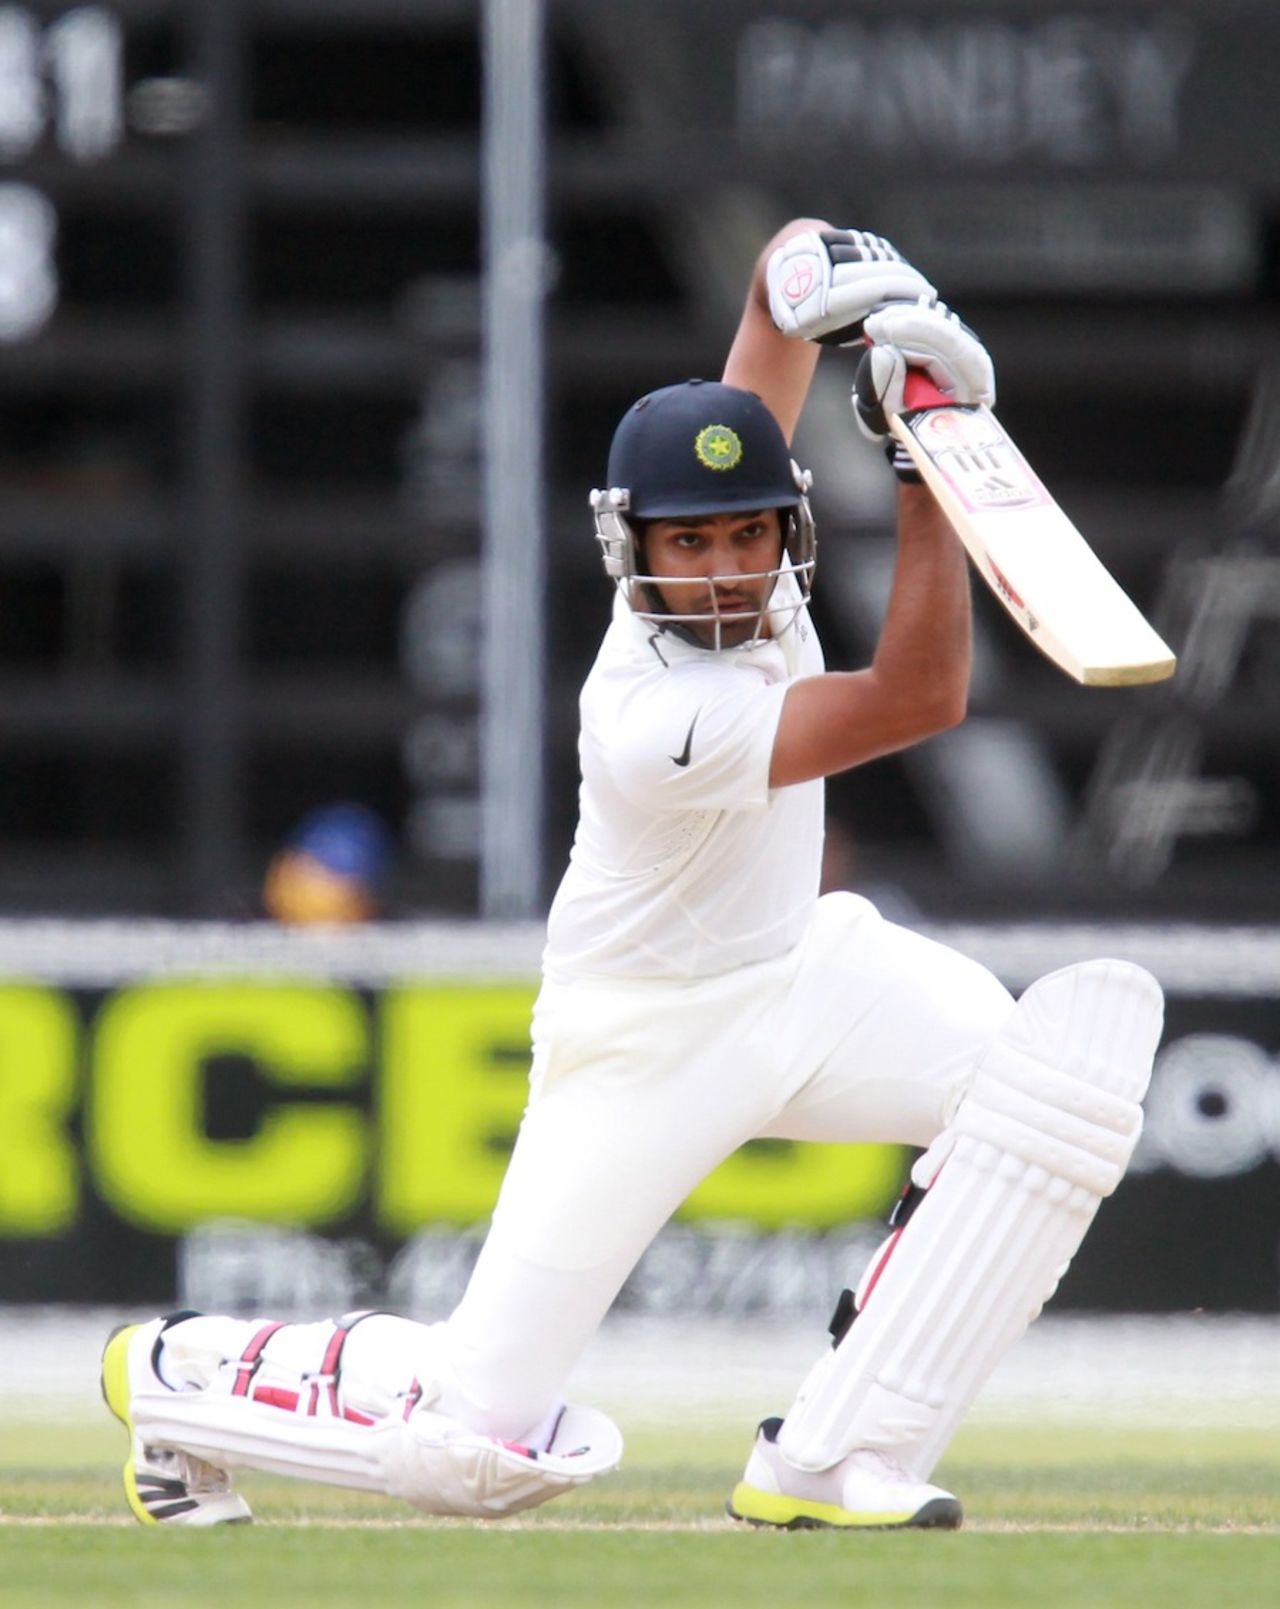 Rohit Sharma drives during his half-century, New Zealand XI v Indians, Whangarei, 2nd day, February 3, 2014